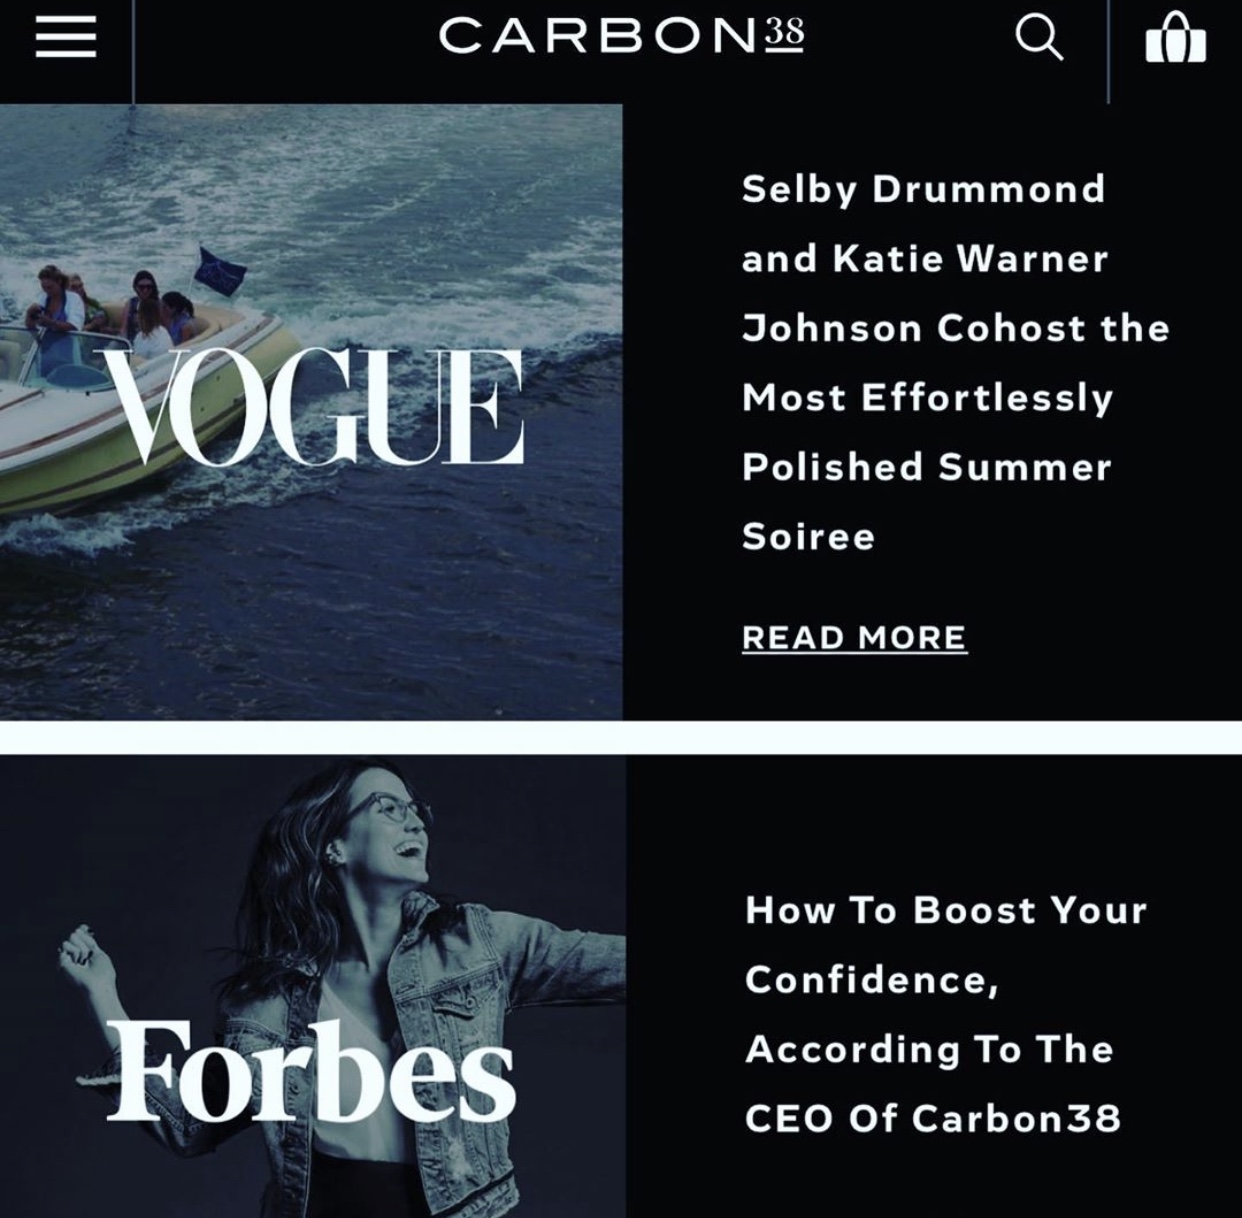 Carbon38 vogue Forbes promo code shawn rene zimmerman 